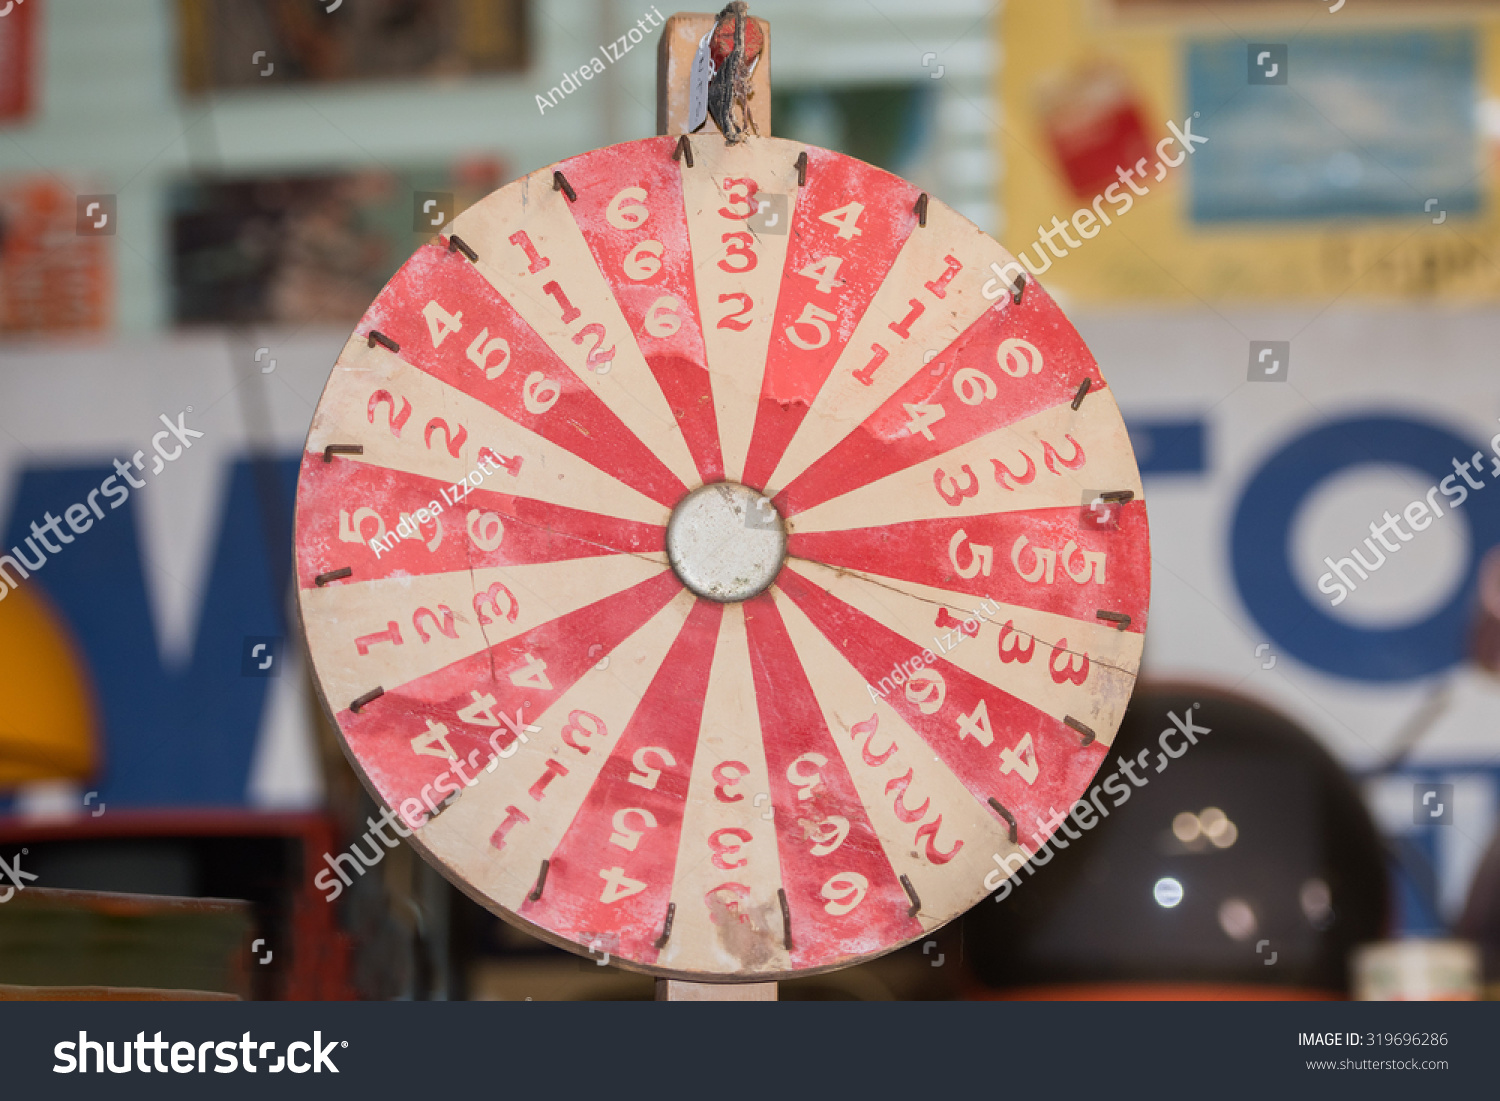 Antique Wood Ancient Wheel Fortune Stock Photo 319696286 - Shutterstock